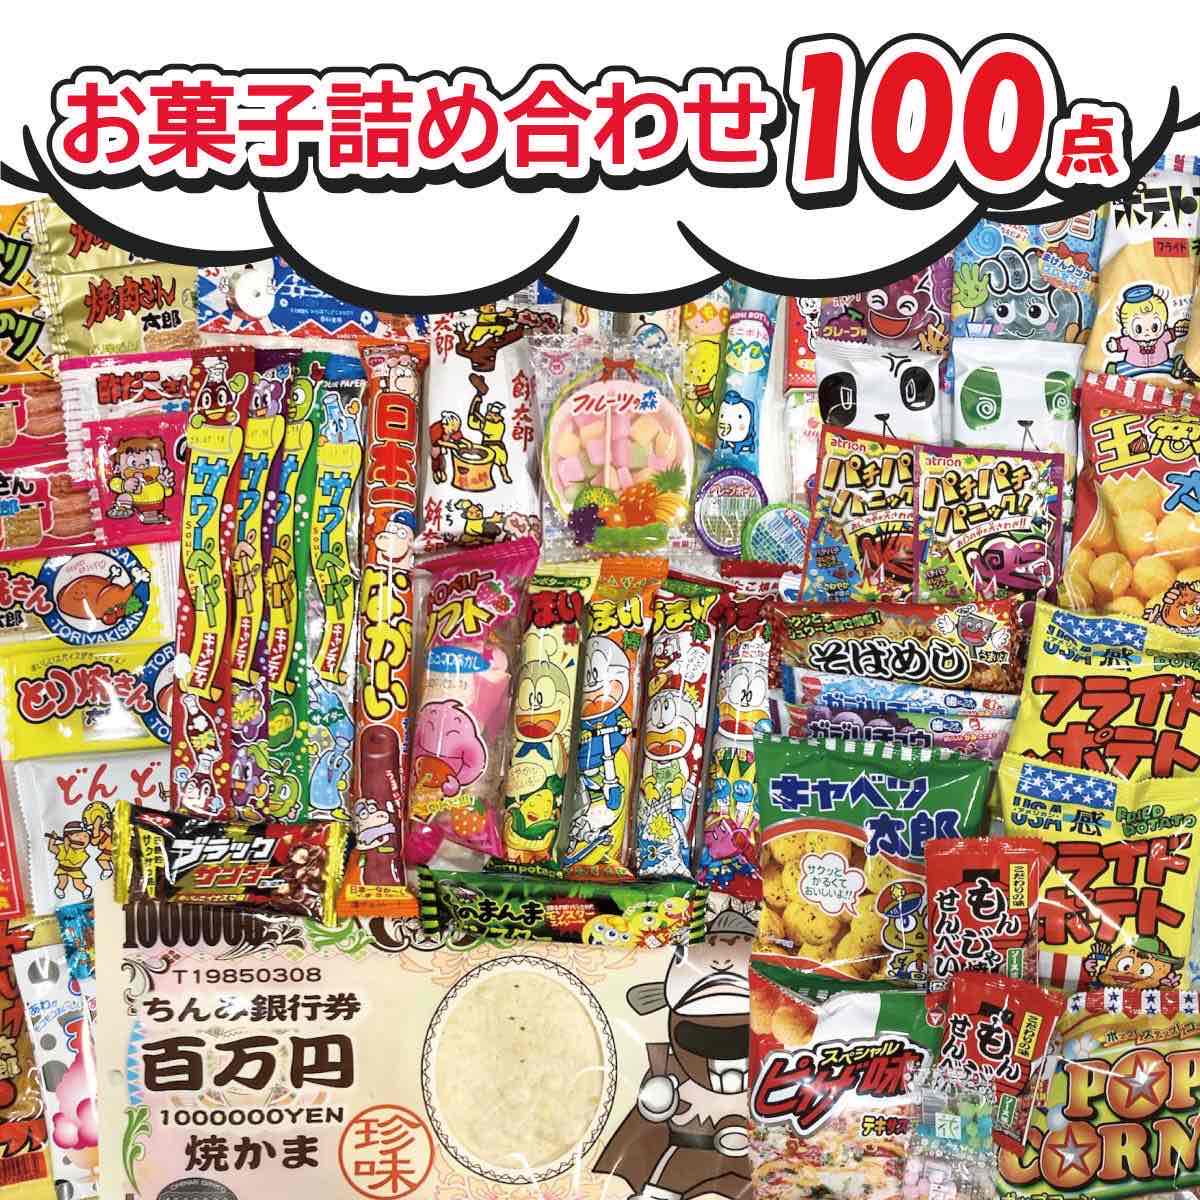  confection assortment J set 100 piece entering party present gift child . Event cheap sweets dagashi bite . flower see snacks bulk buying . industry go in .